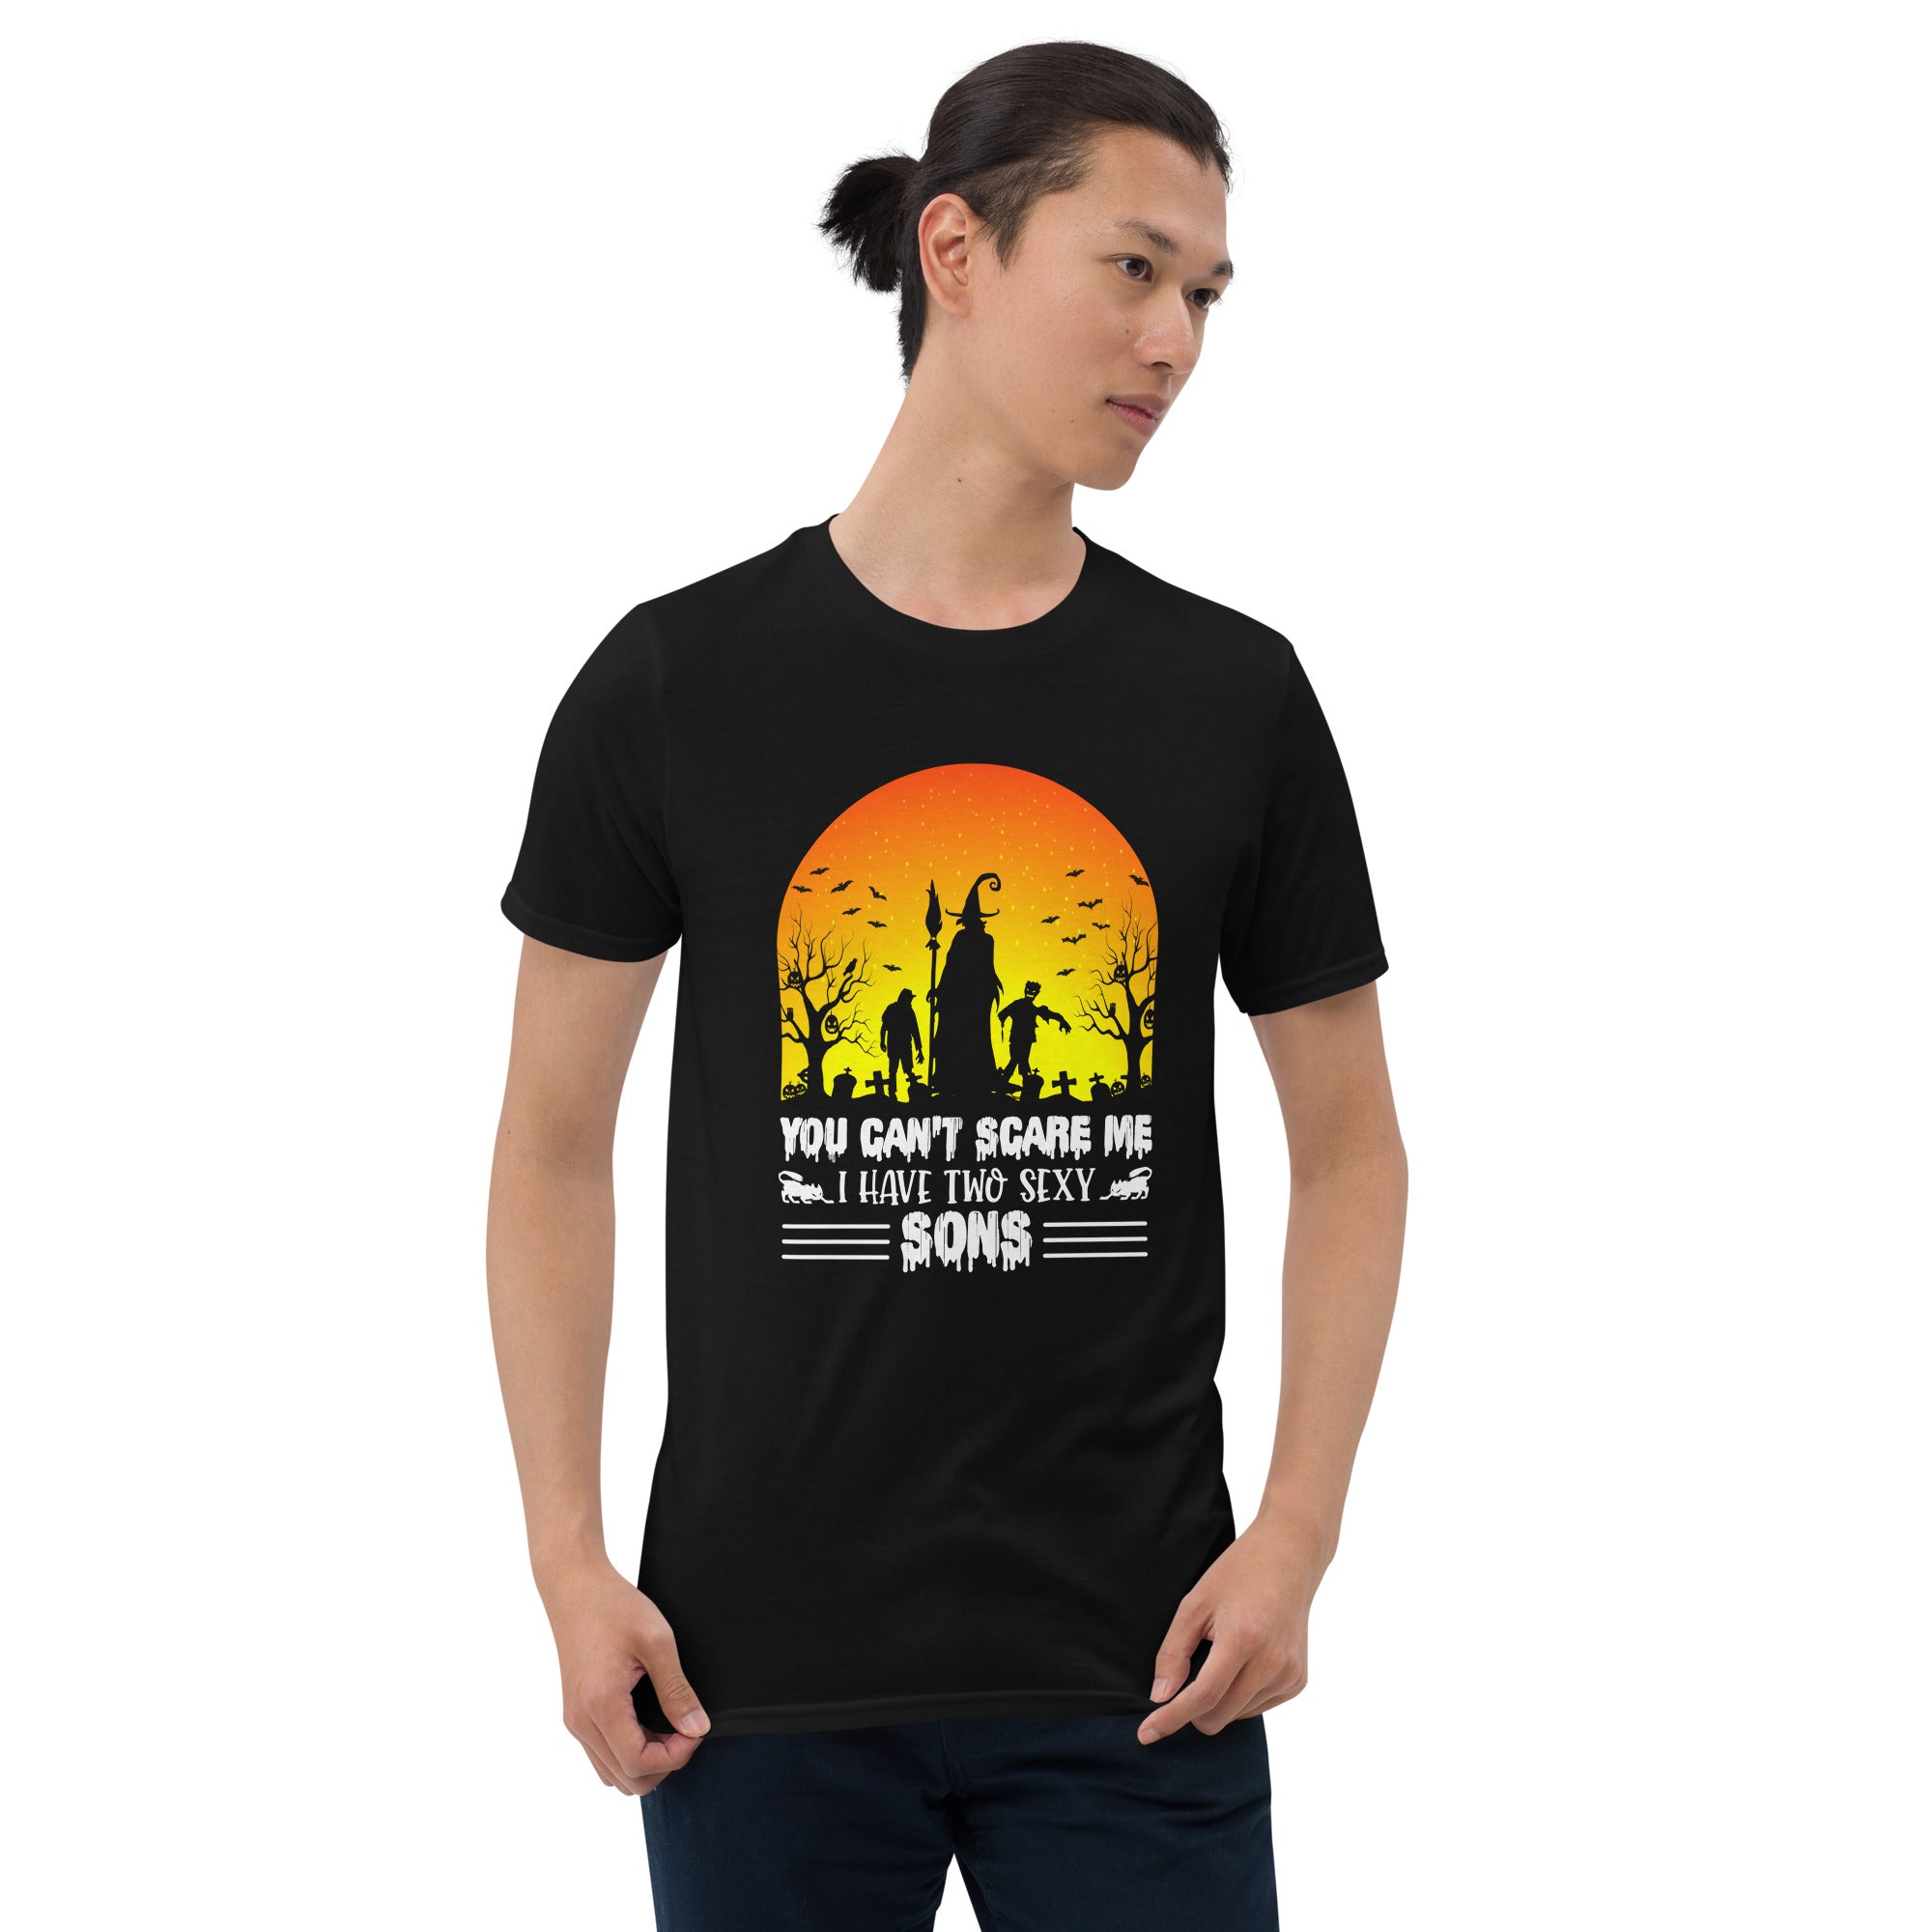 You Can't Scare Me - Short-Sleeve Unisex T-Shirt